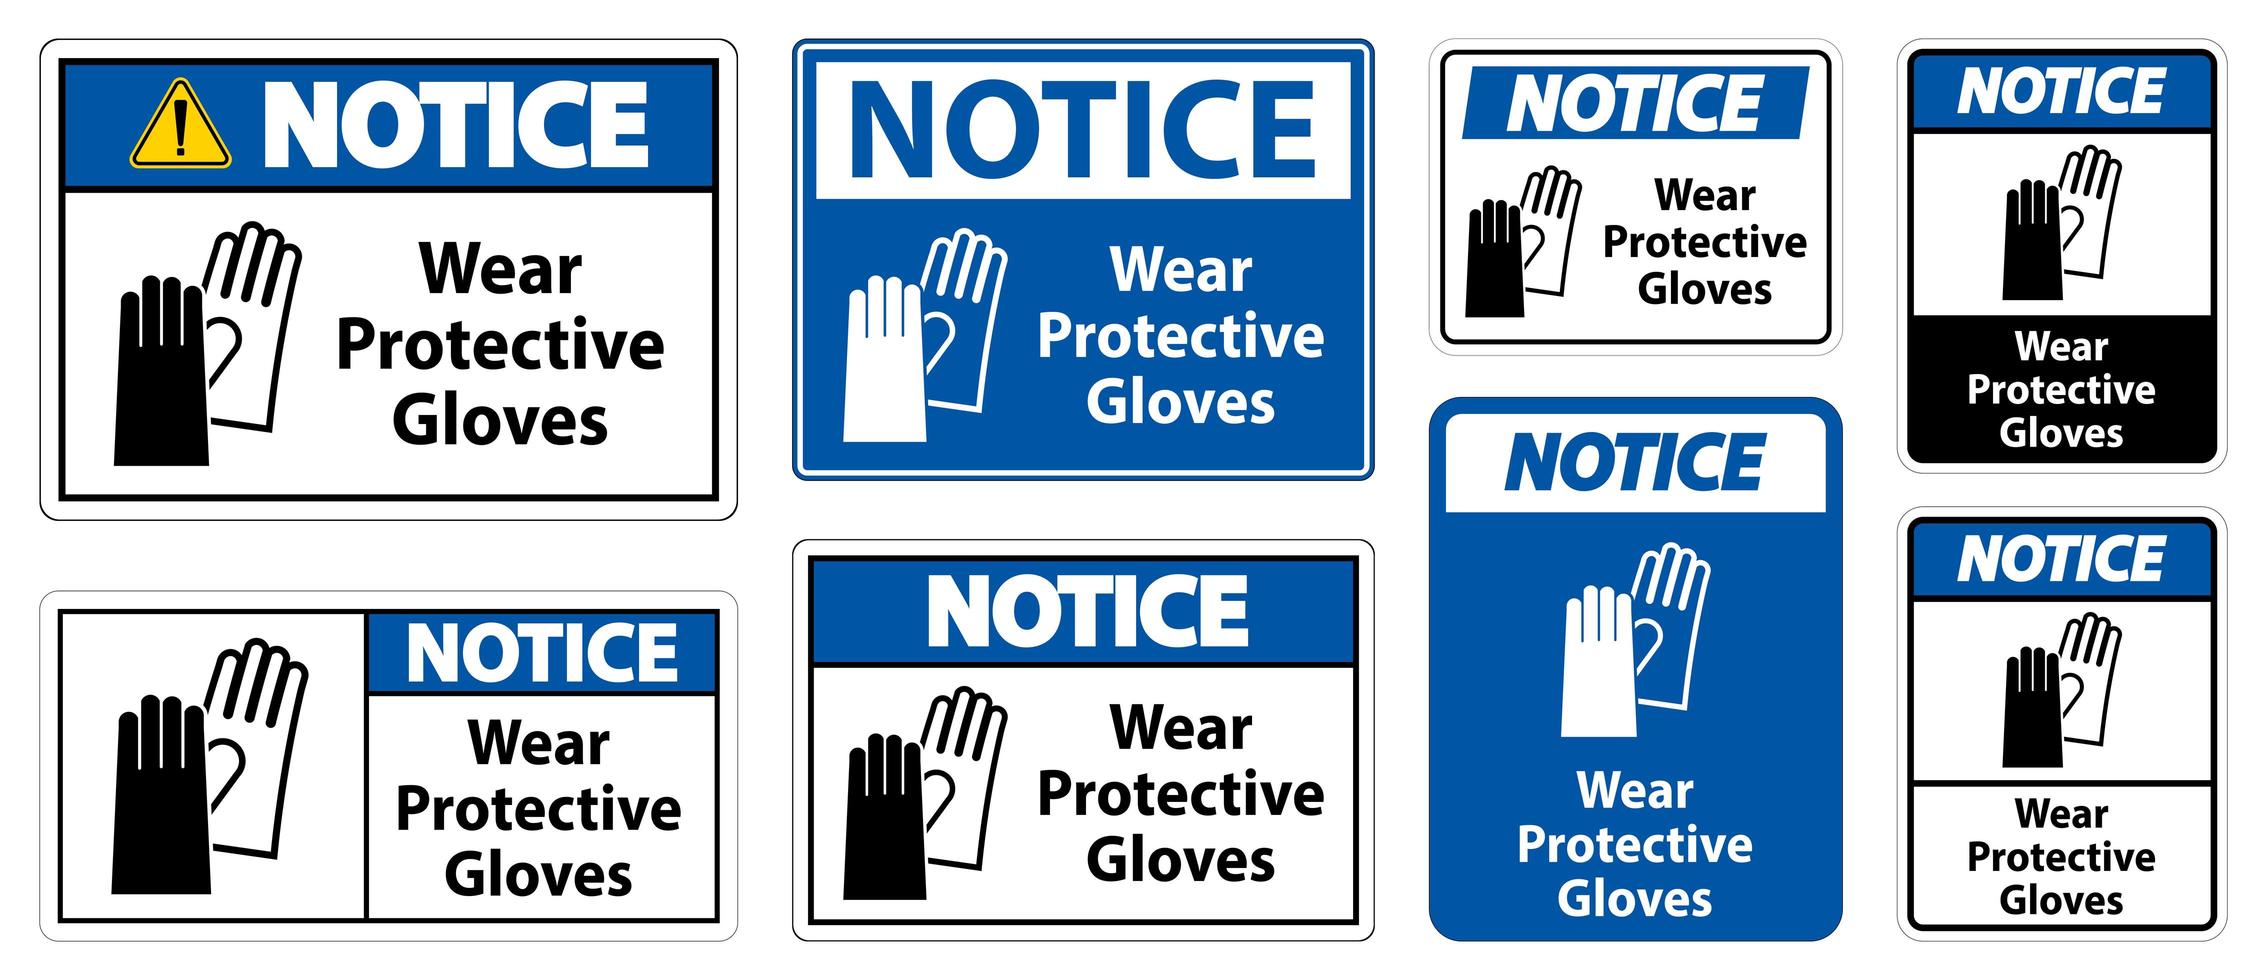 Wear protective gloves sign vector